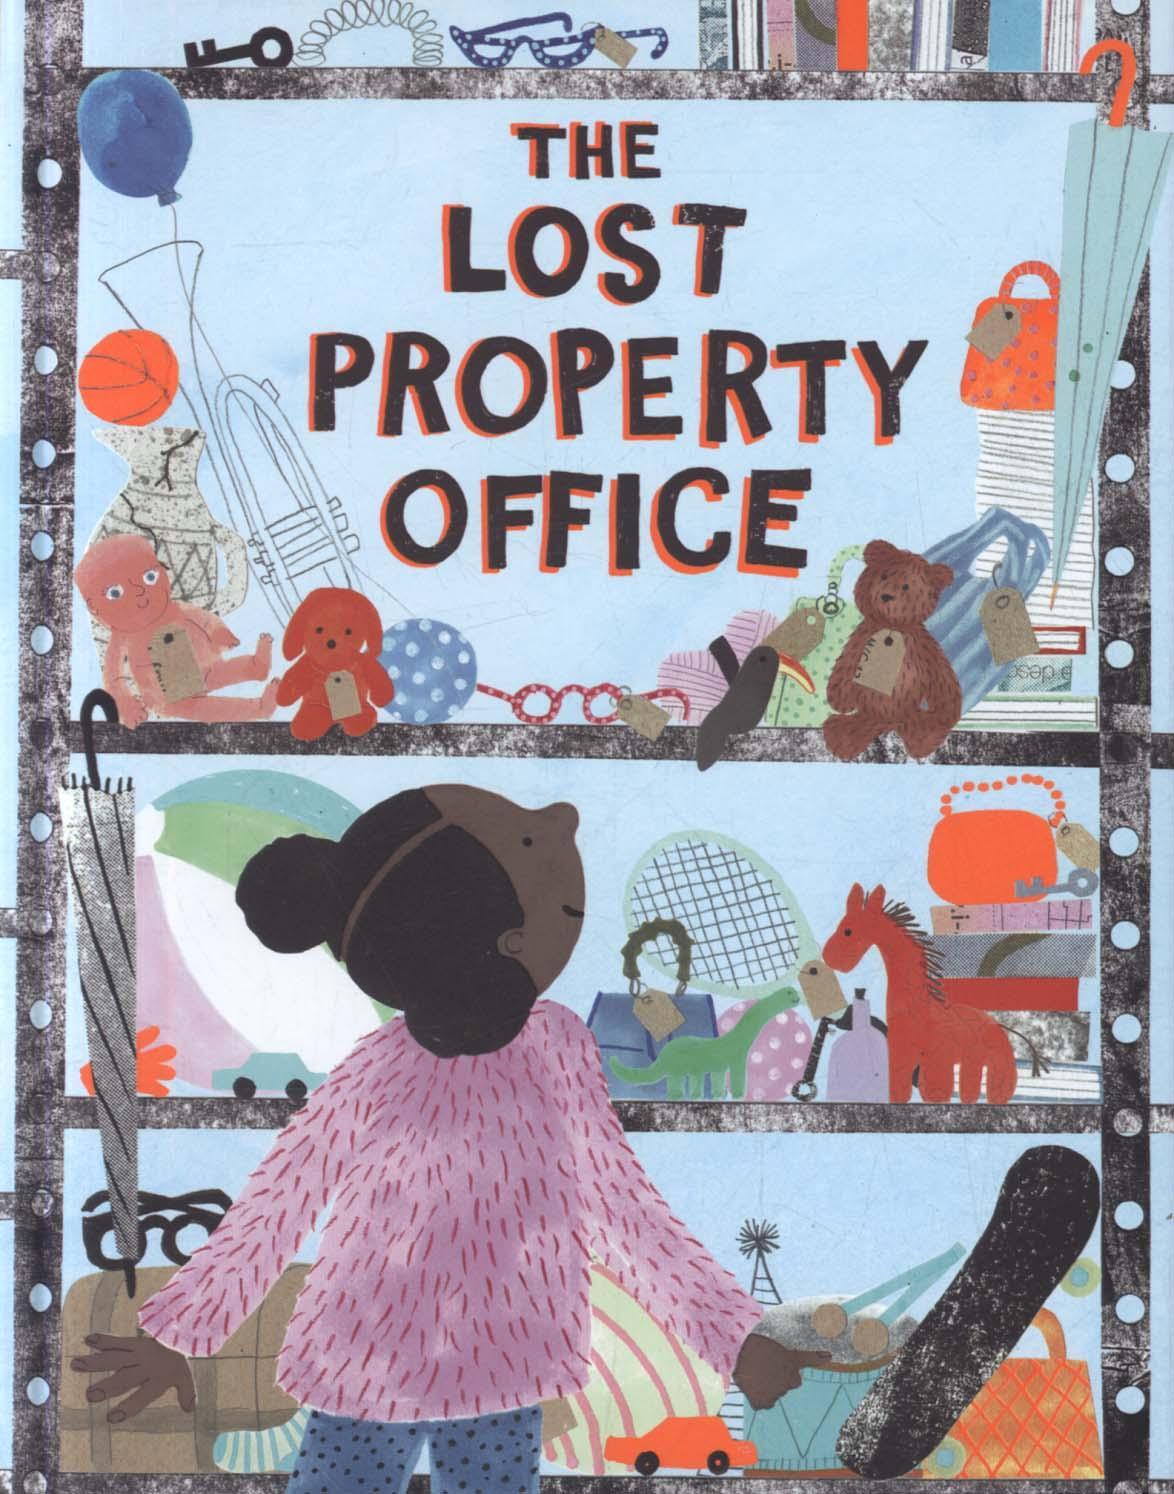 Lost Property Office